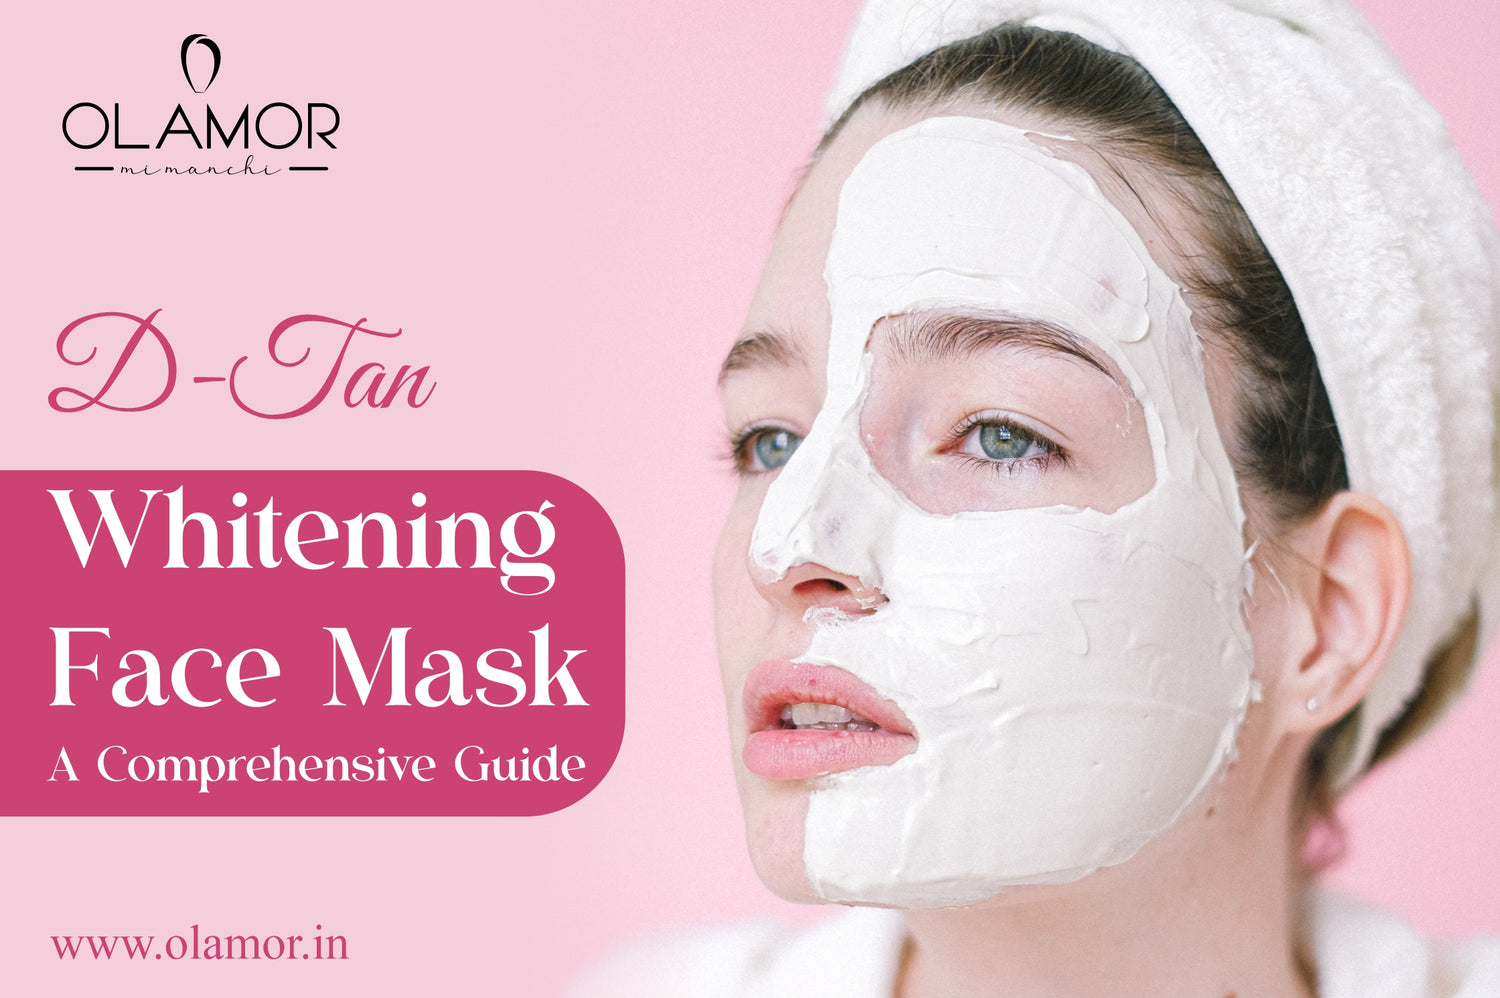 OLAMOR D-Tan Whitening Face Mask: A Comprehensive Guide